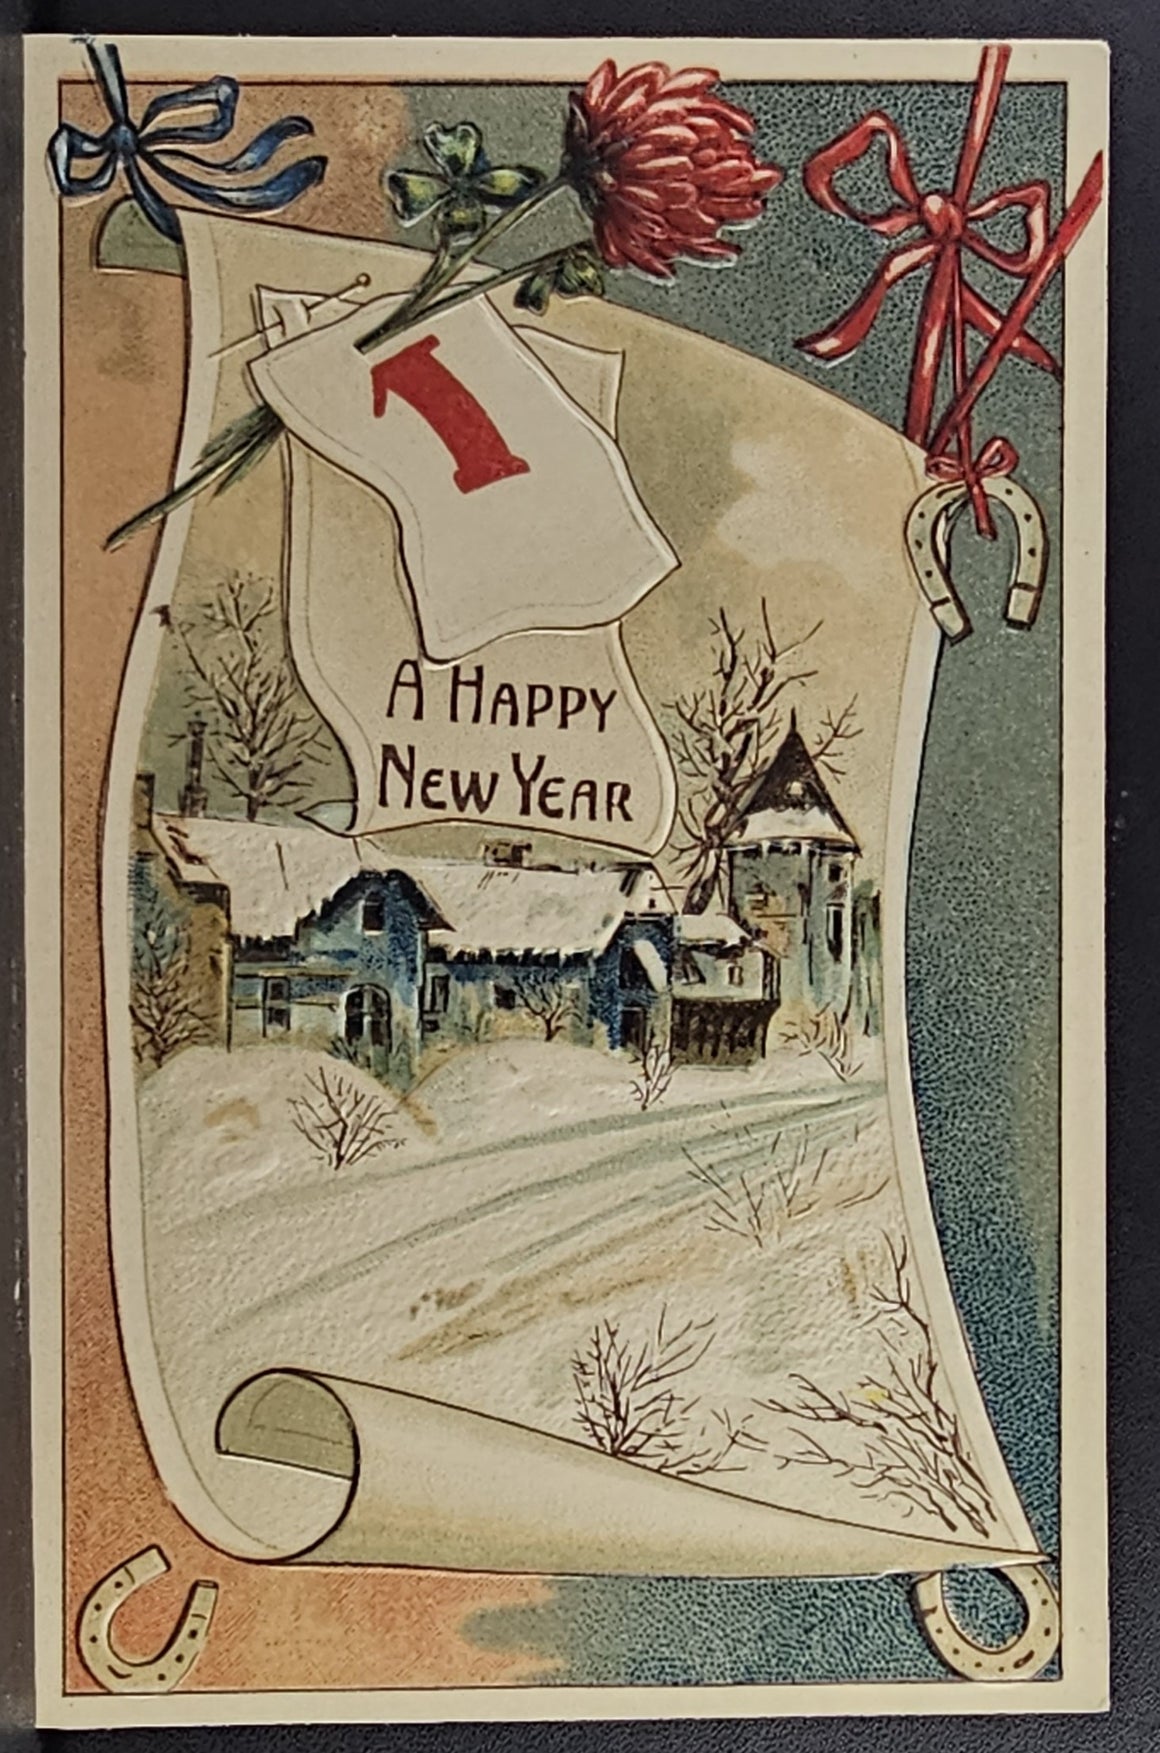 New Year Postcard Flowers and Winter Landscape on Parchment Embossed Unused Card